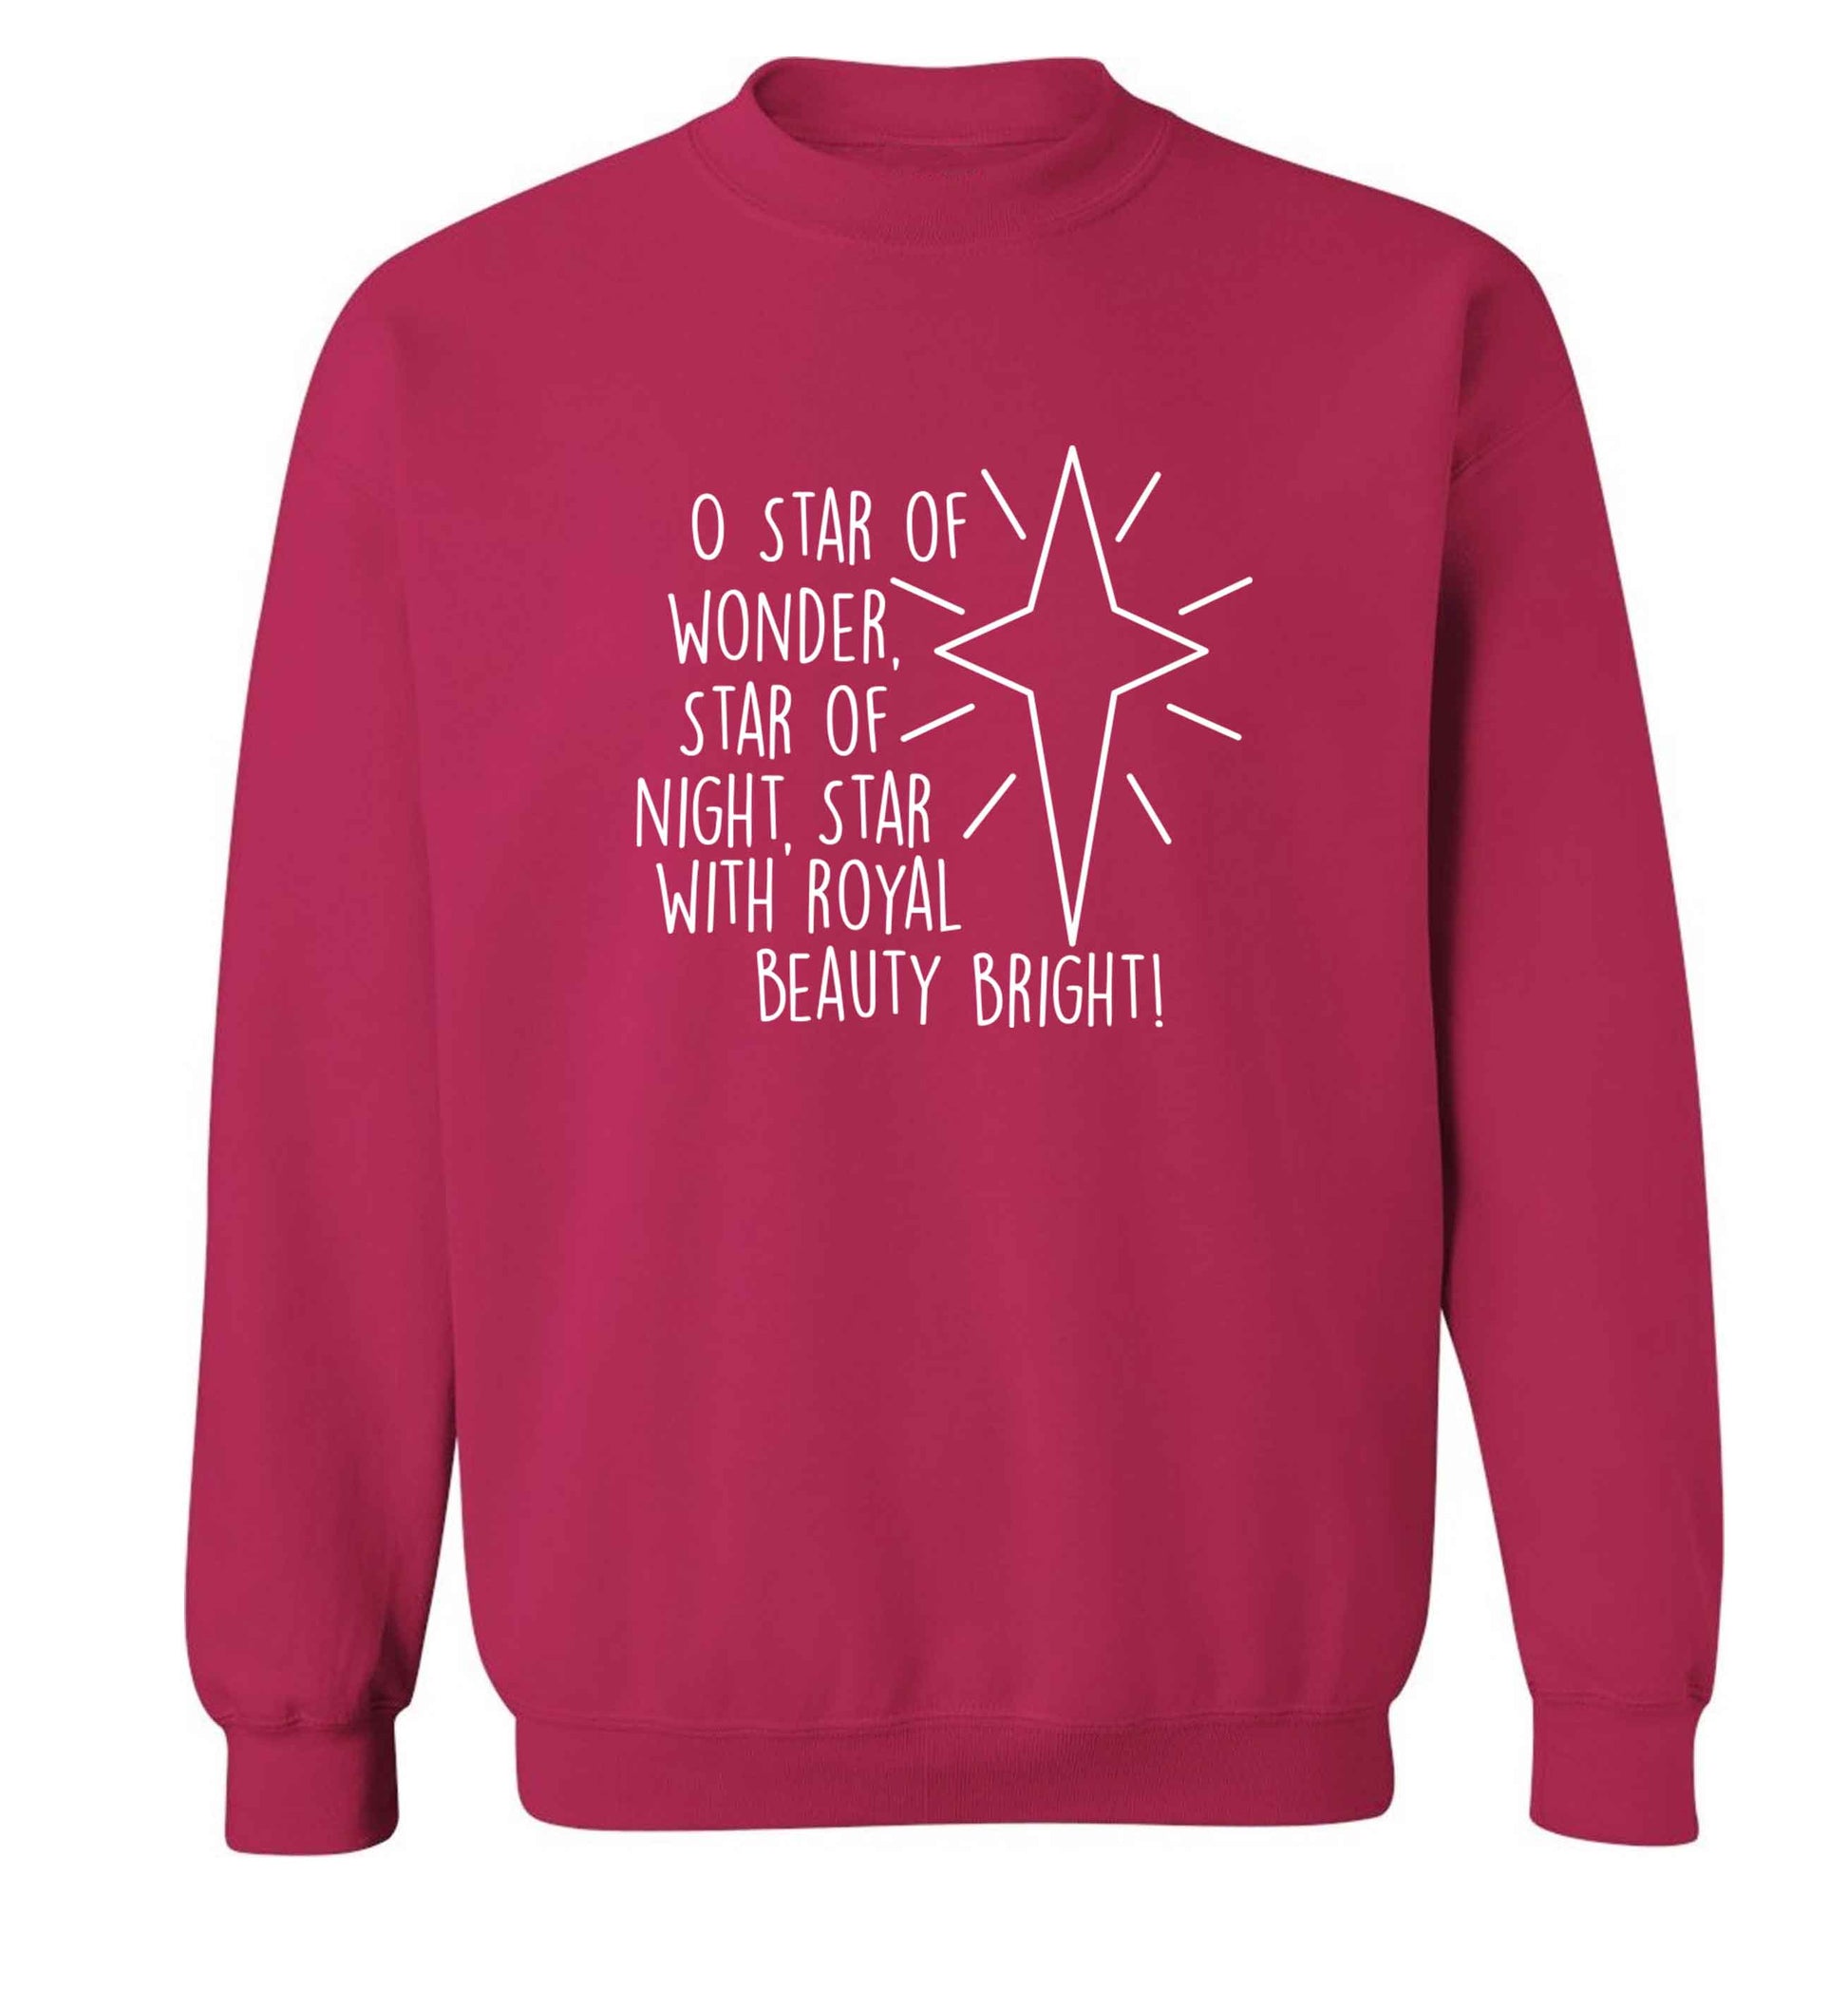 Oh star of wonder star of night, star with royal beauty bright adult's unisex pink sweater 2XL